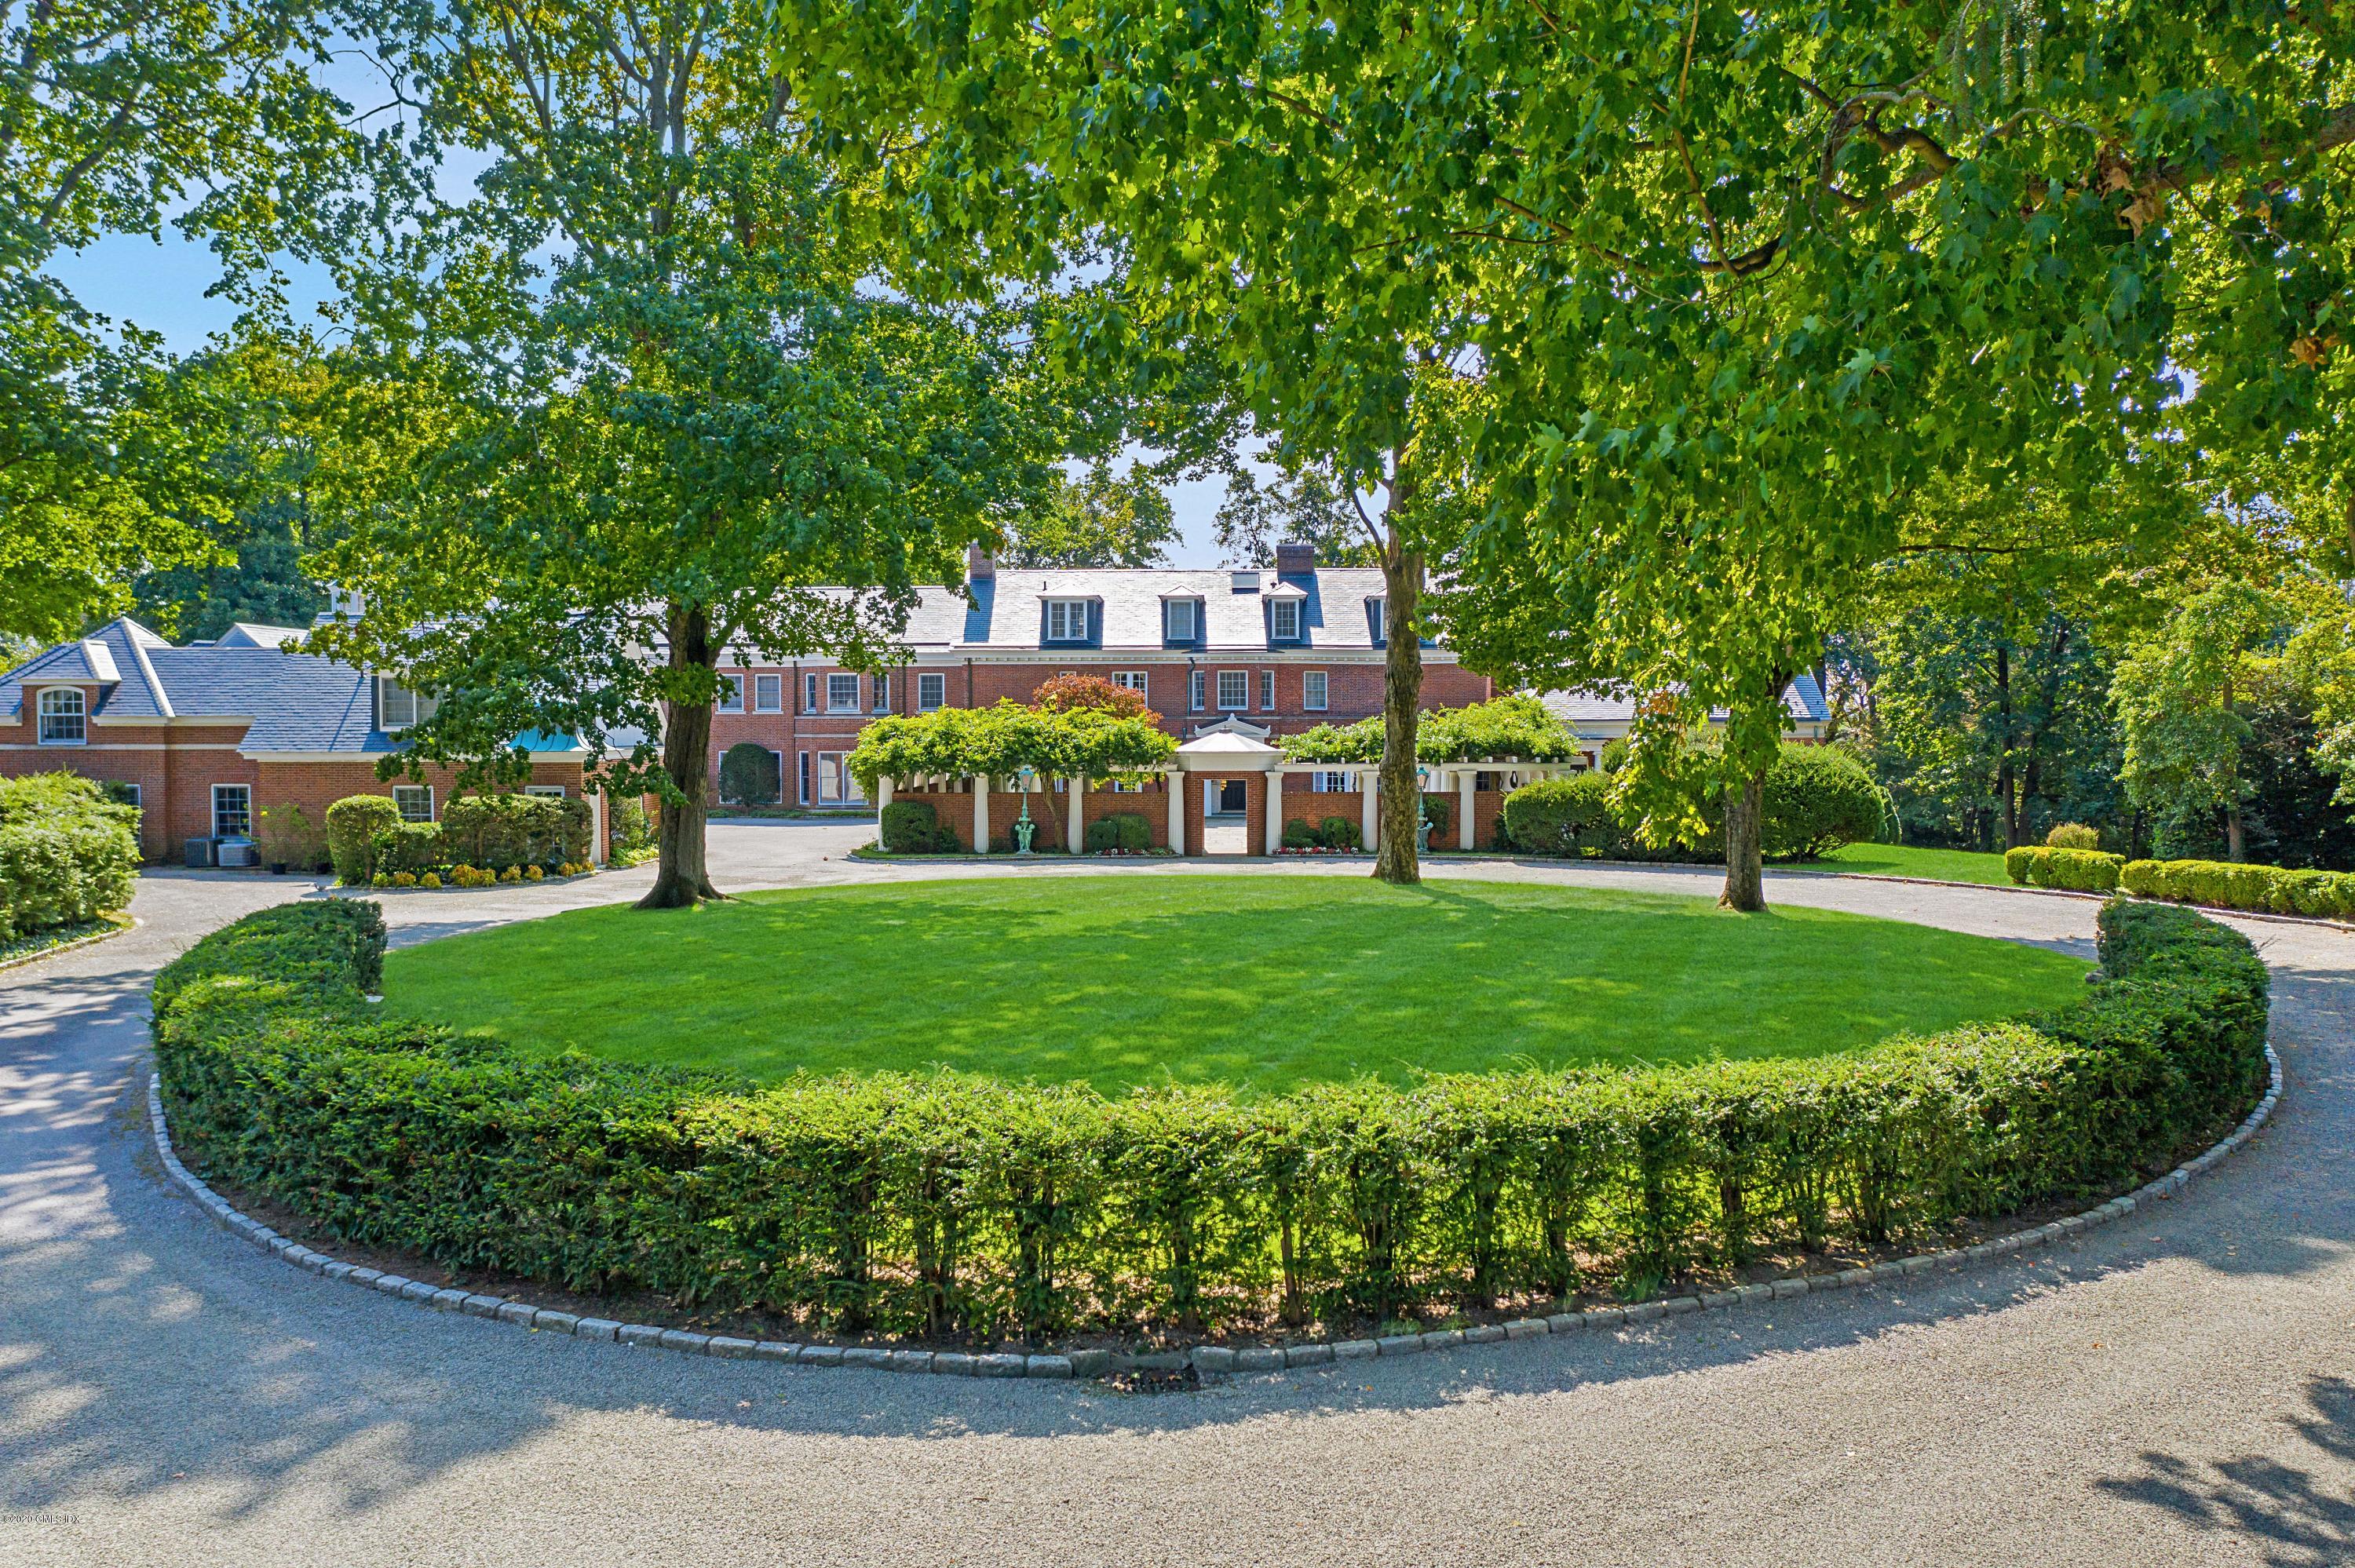 30 Field Point Drive, Greenwich, Connecticut - 11 Bedrooms  
9.5 Bathrooms - 